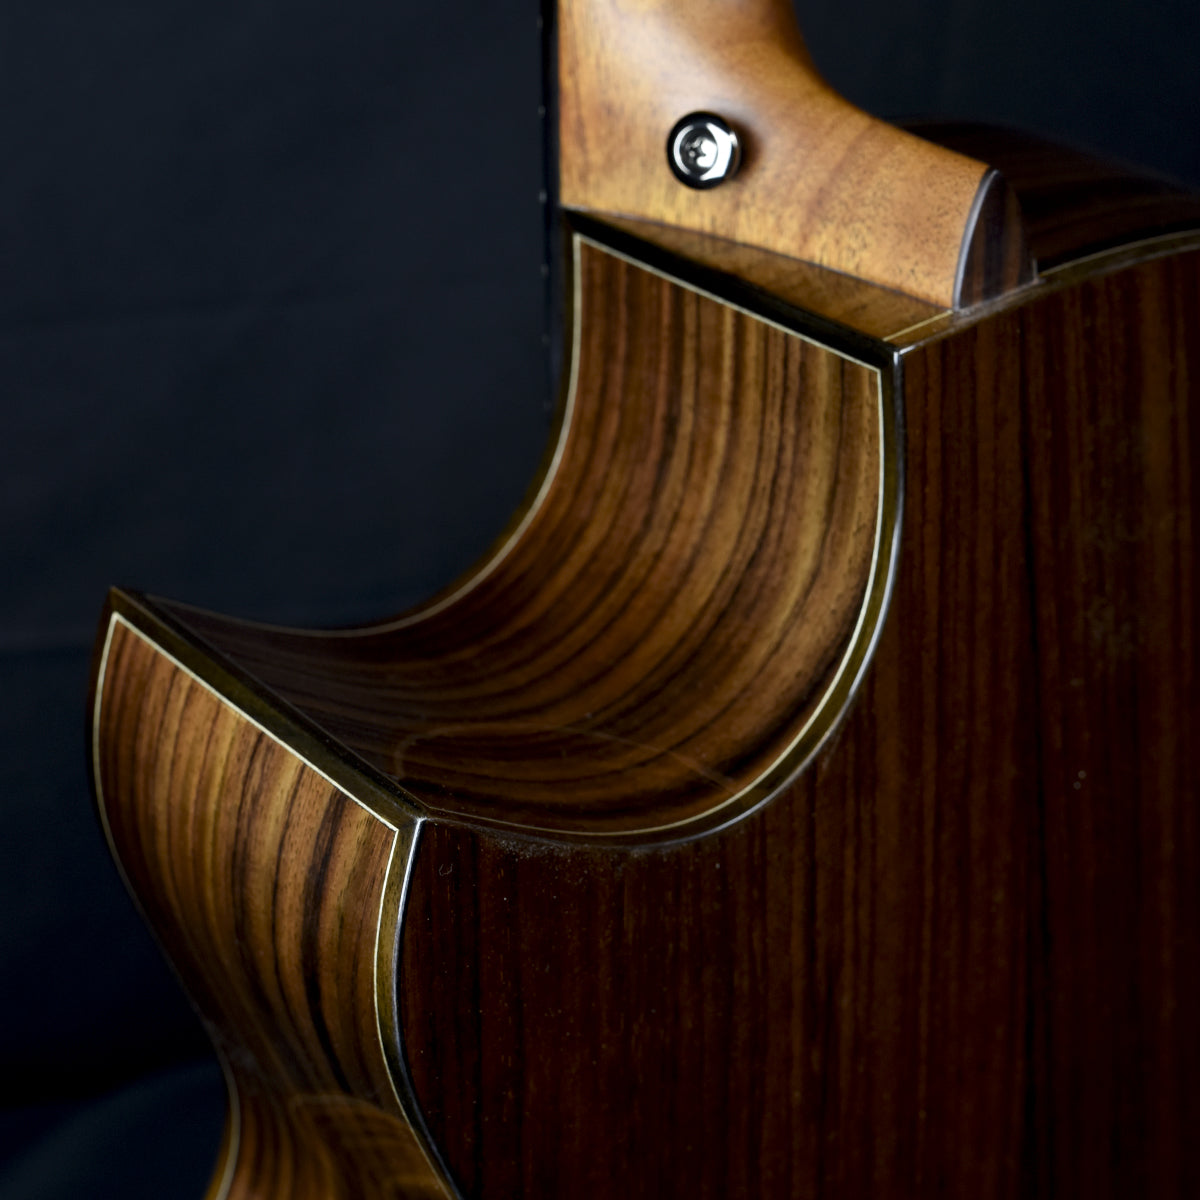 SJ Sitka with Indian Rosewood